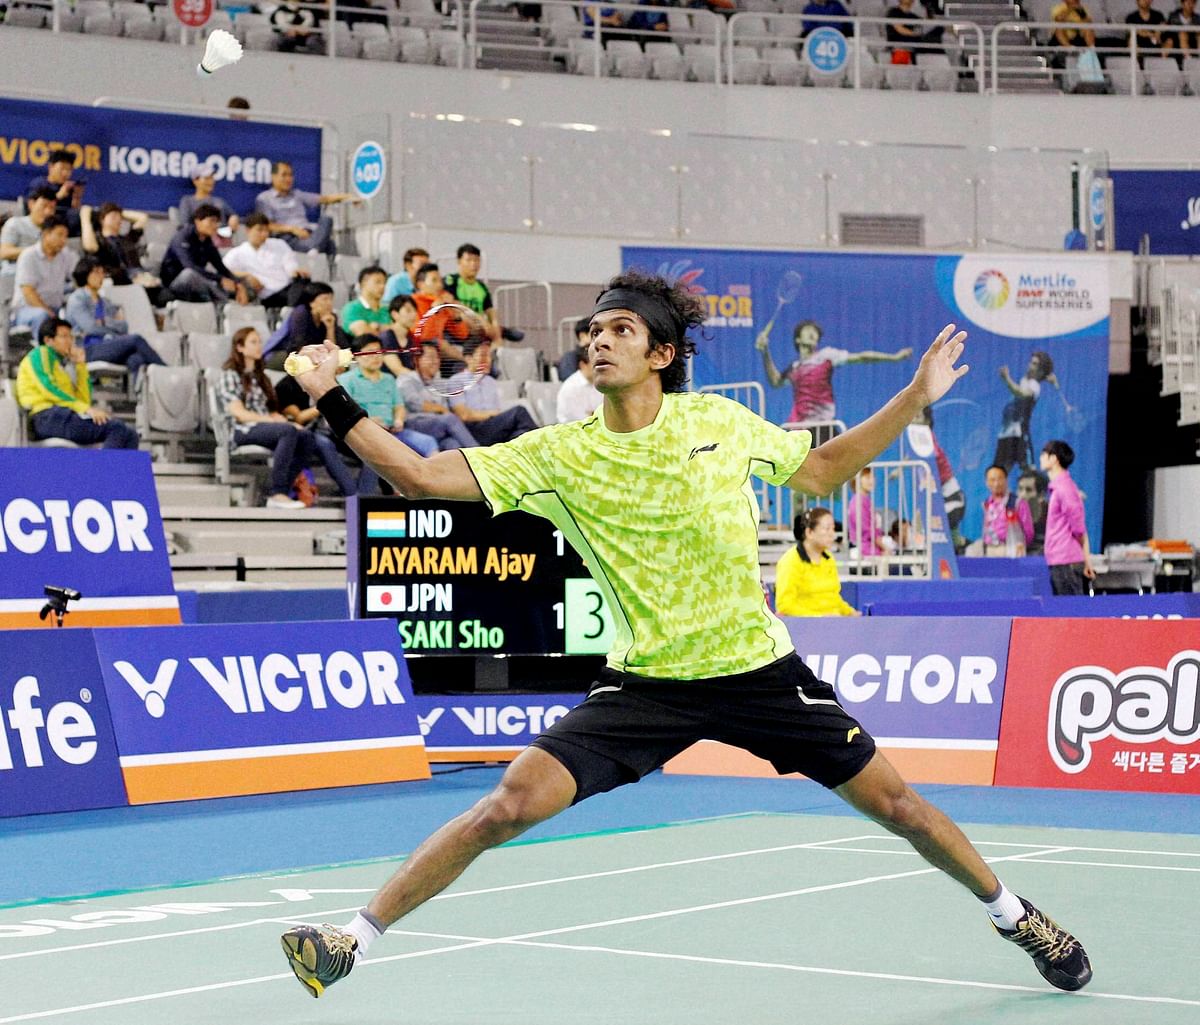 Jayaram will now face World No. 1 Chen Long of China in the final.